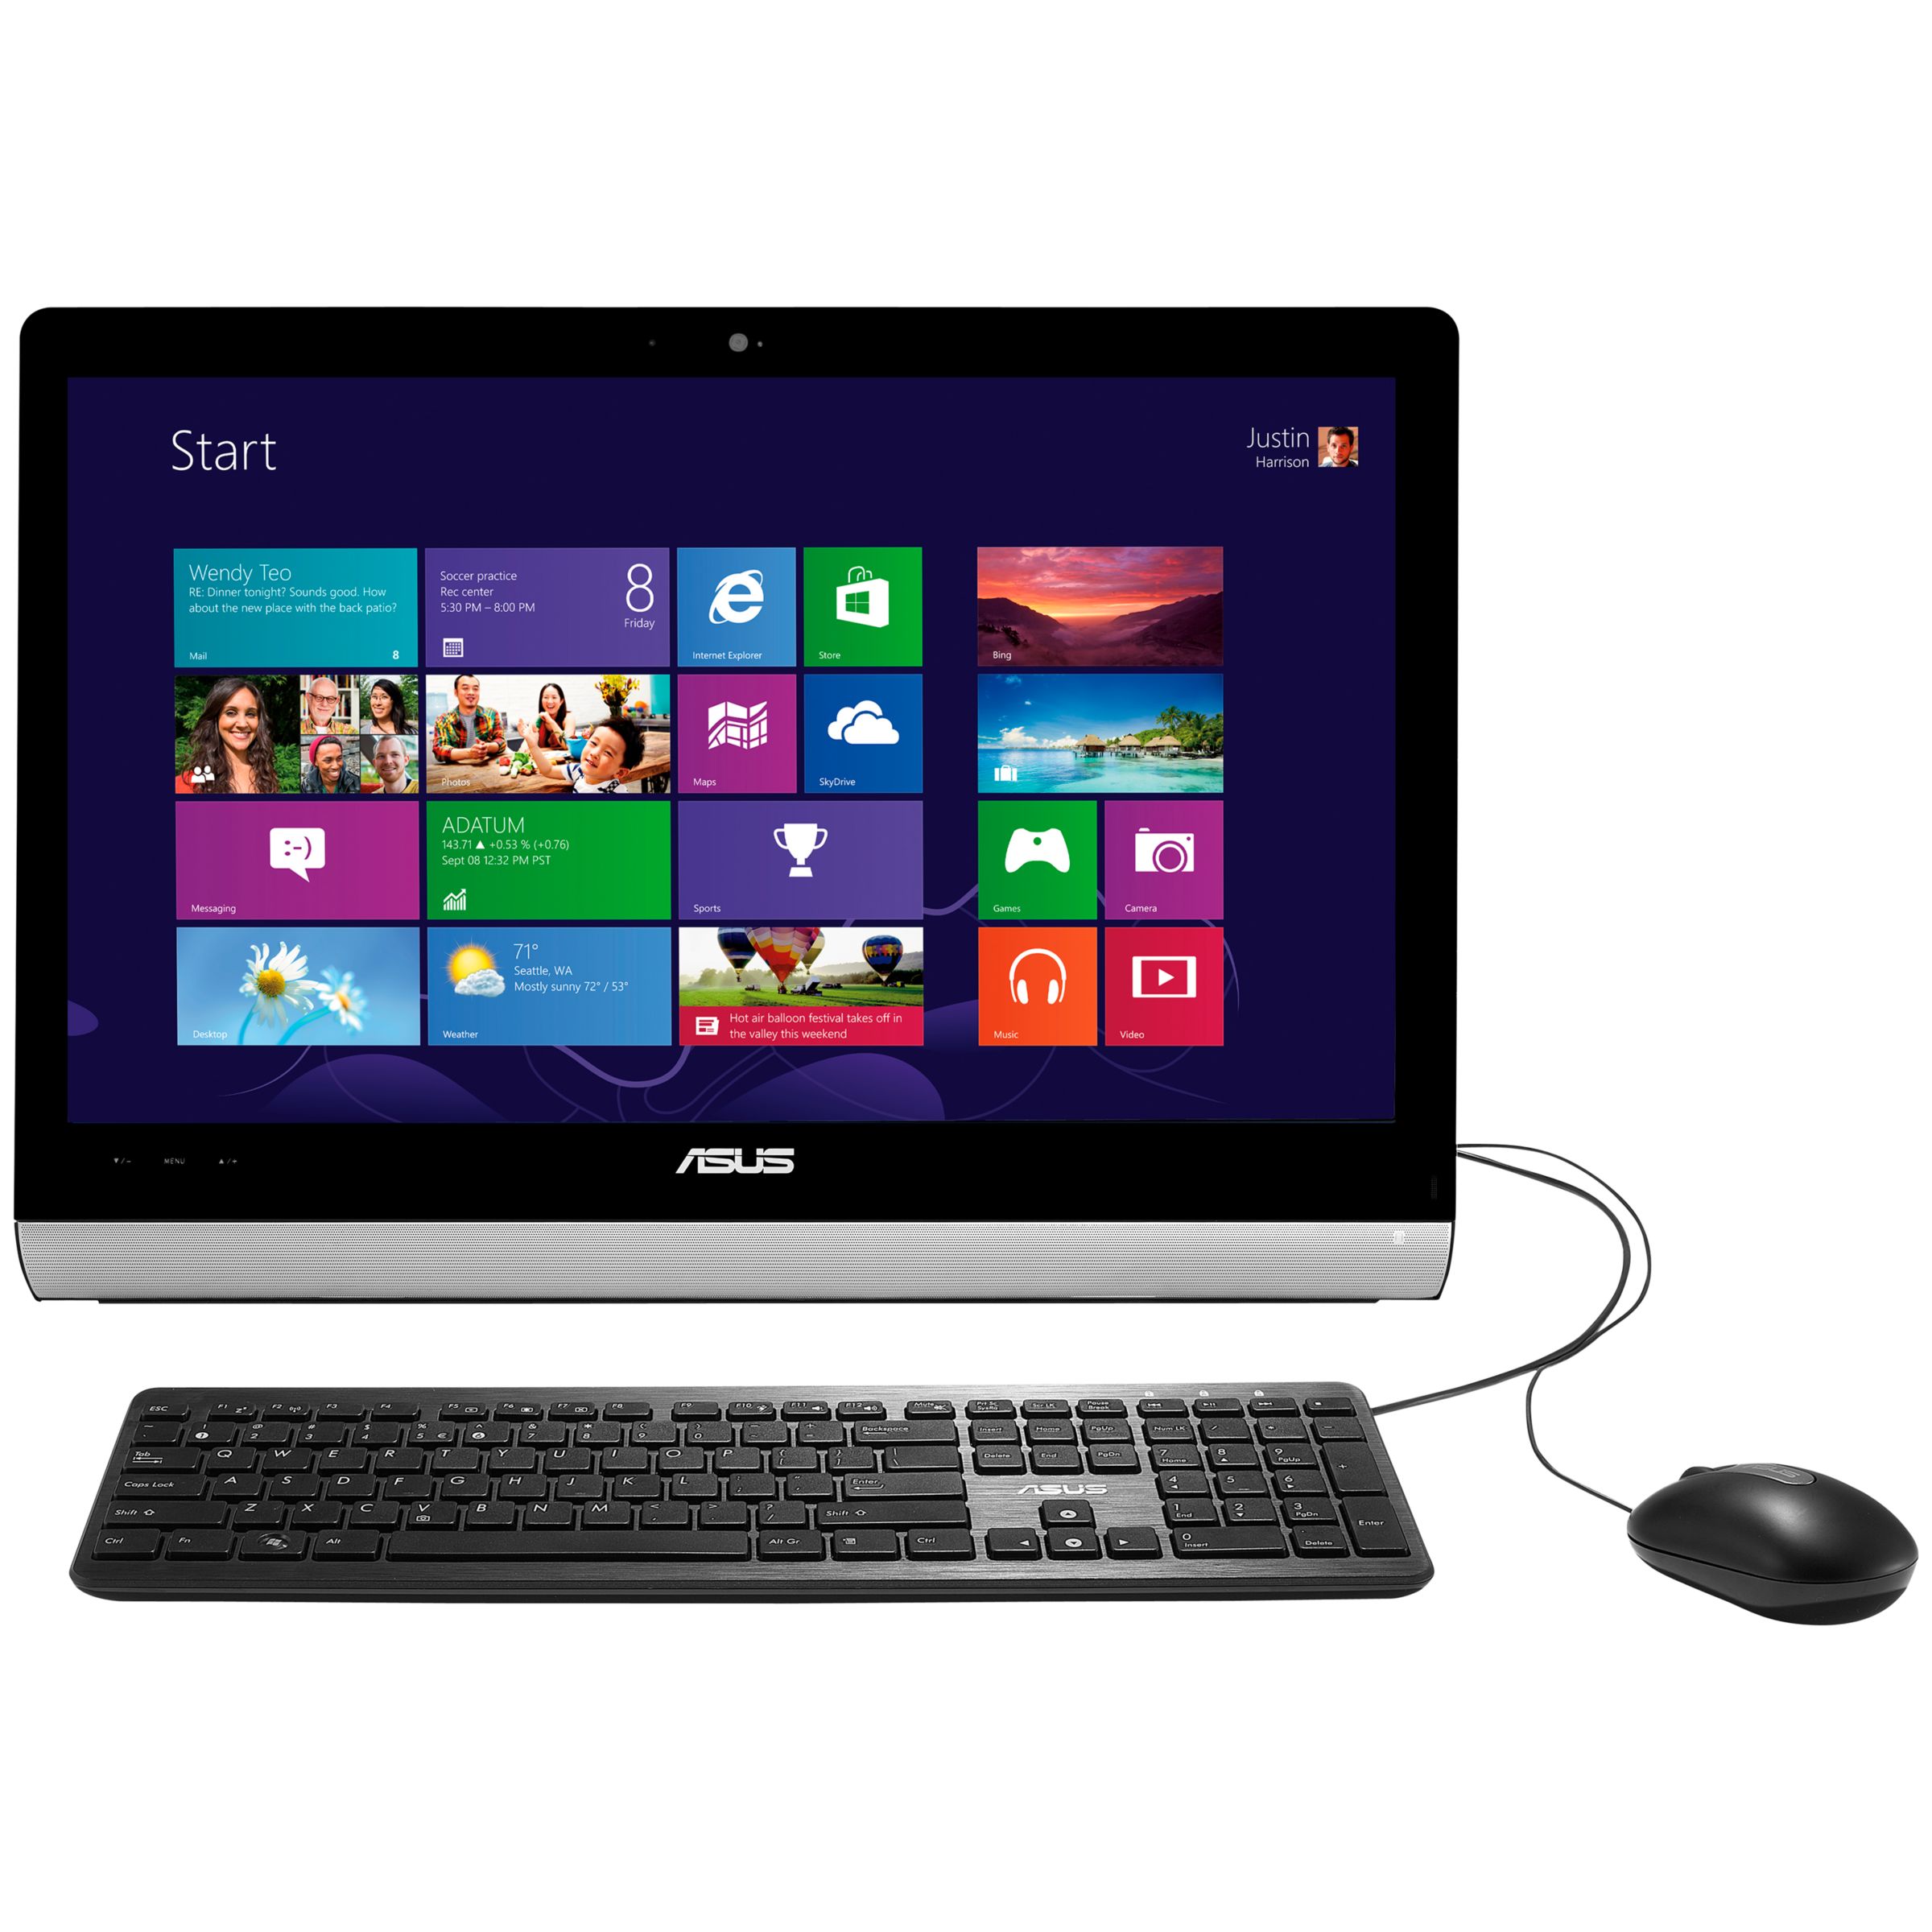 Asus Et2221 All In One Desktop Pc Intel Core I3 4gb Ram 1tb 21 5 Touch Screen Black Silver